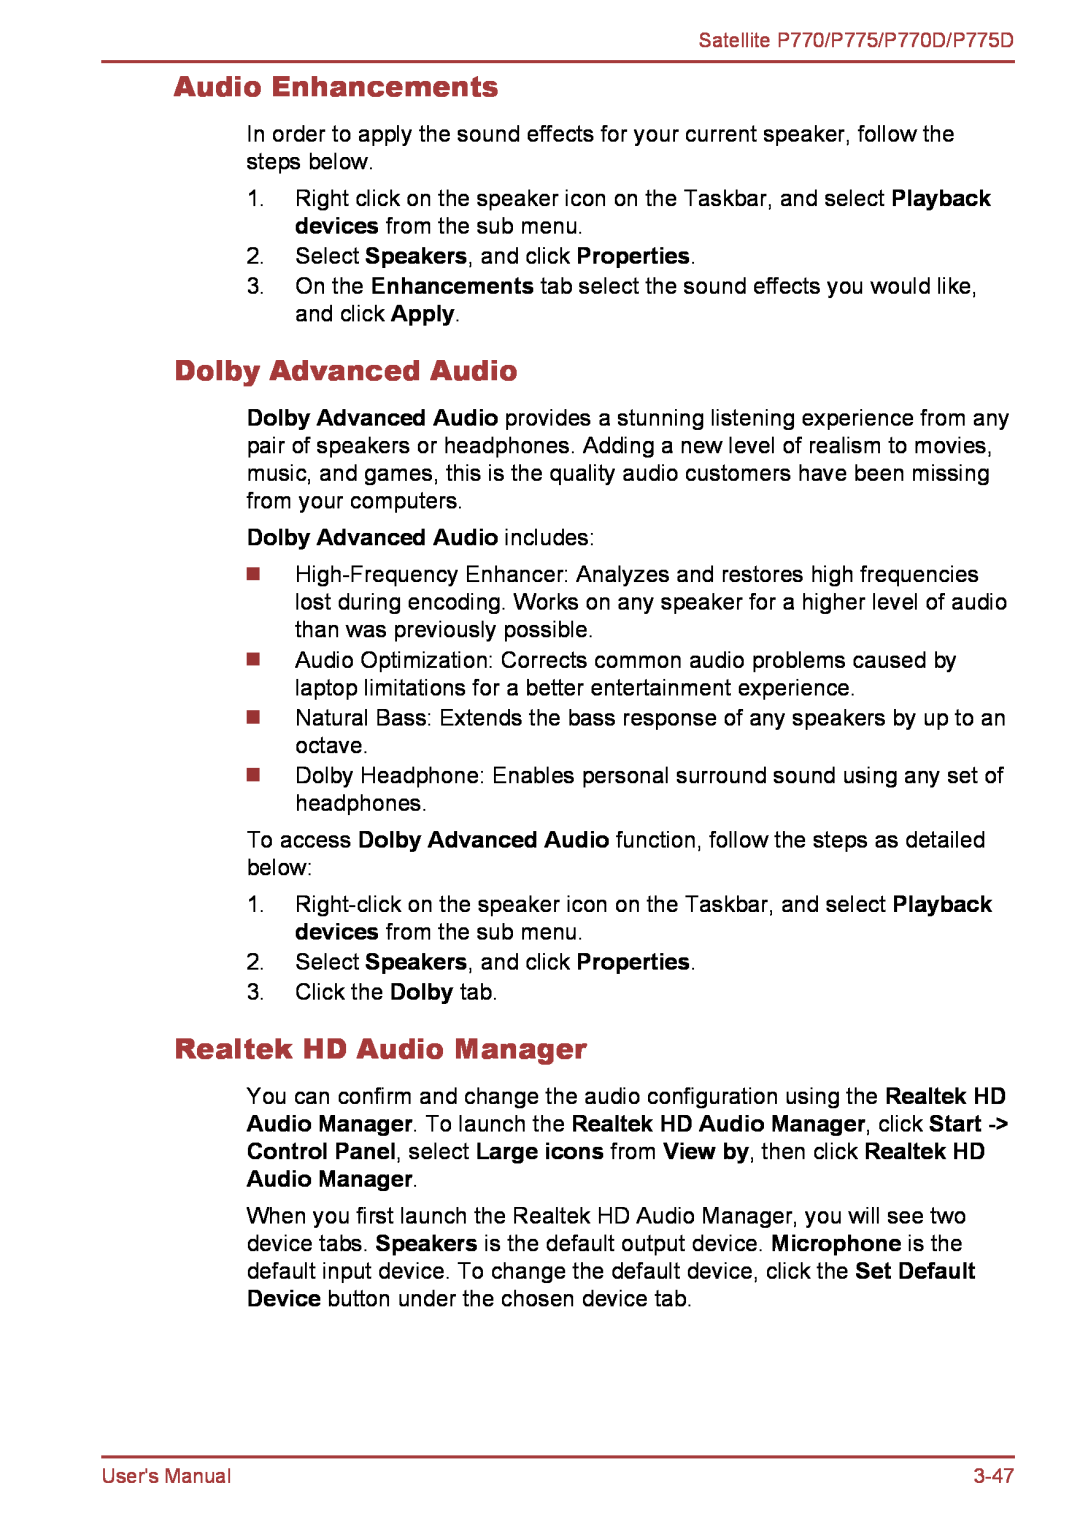 Toshiba P770 user manual Audio Enhancements, Realtek HD Audio Manager, Dolby Advanced Audio includes 